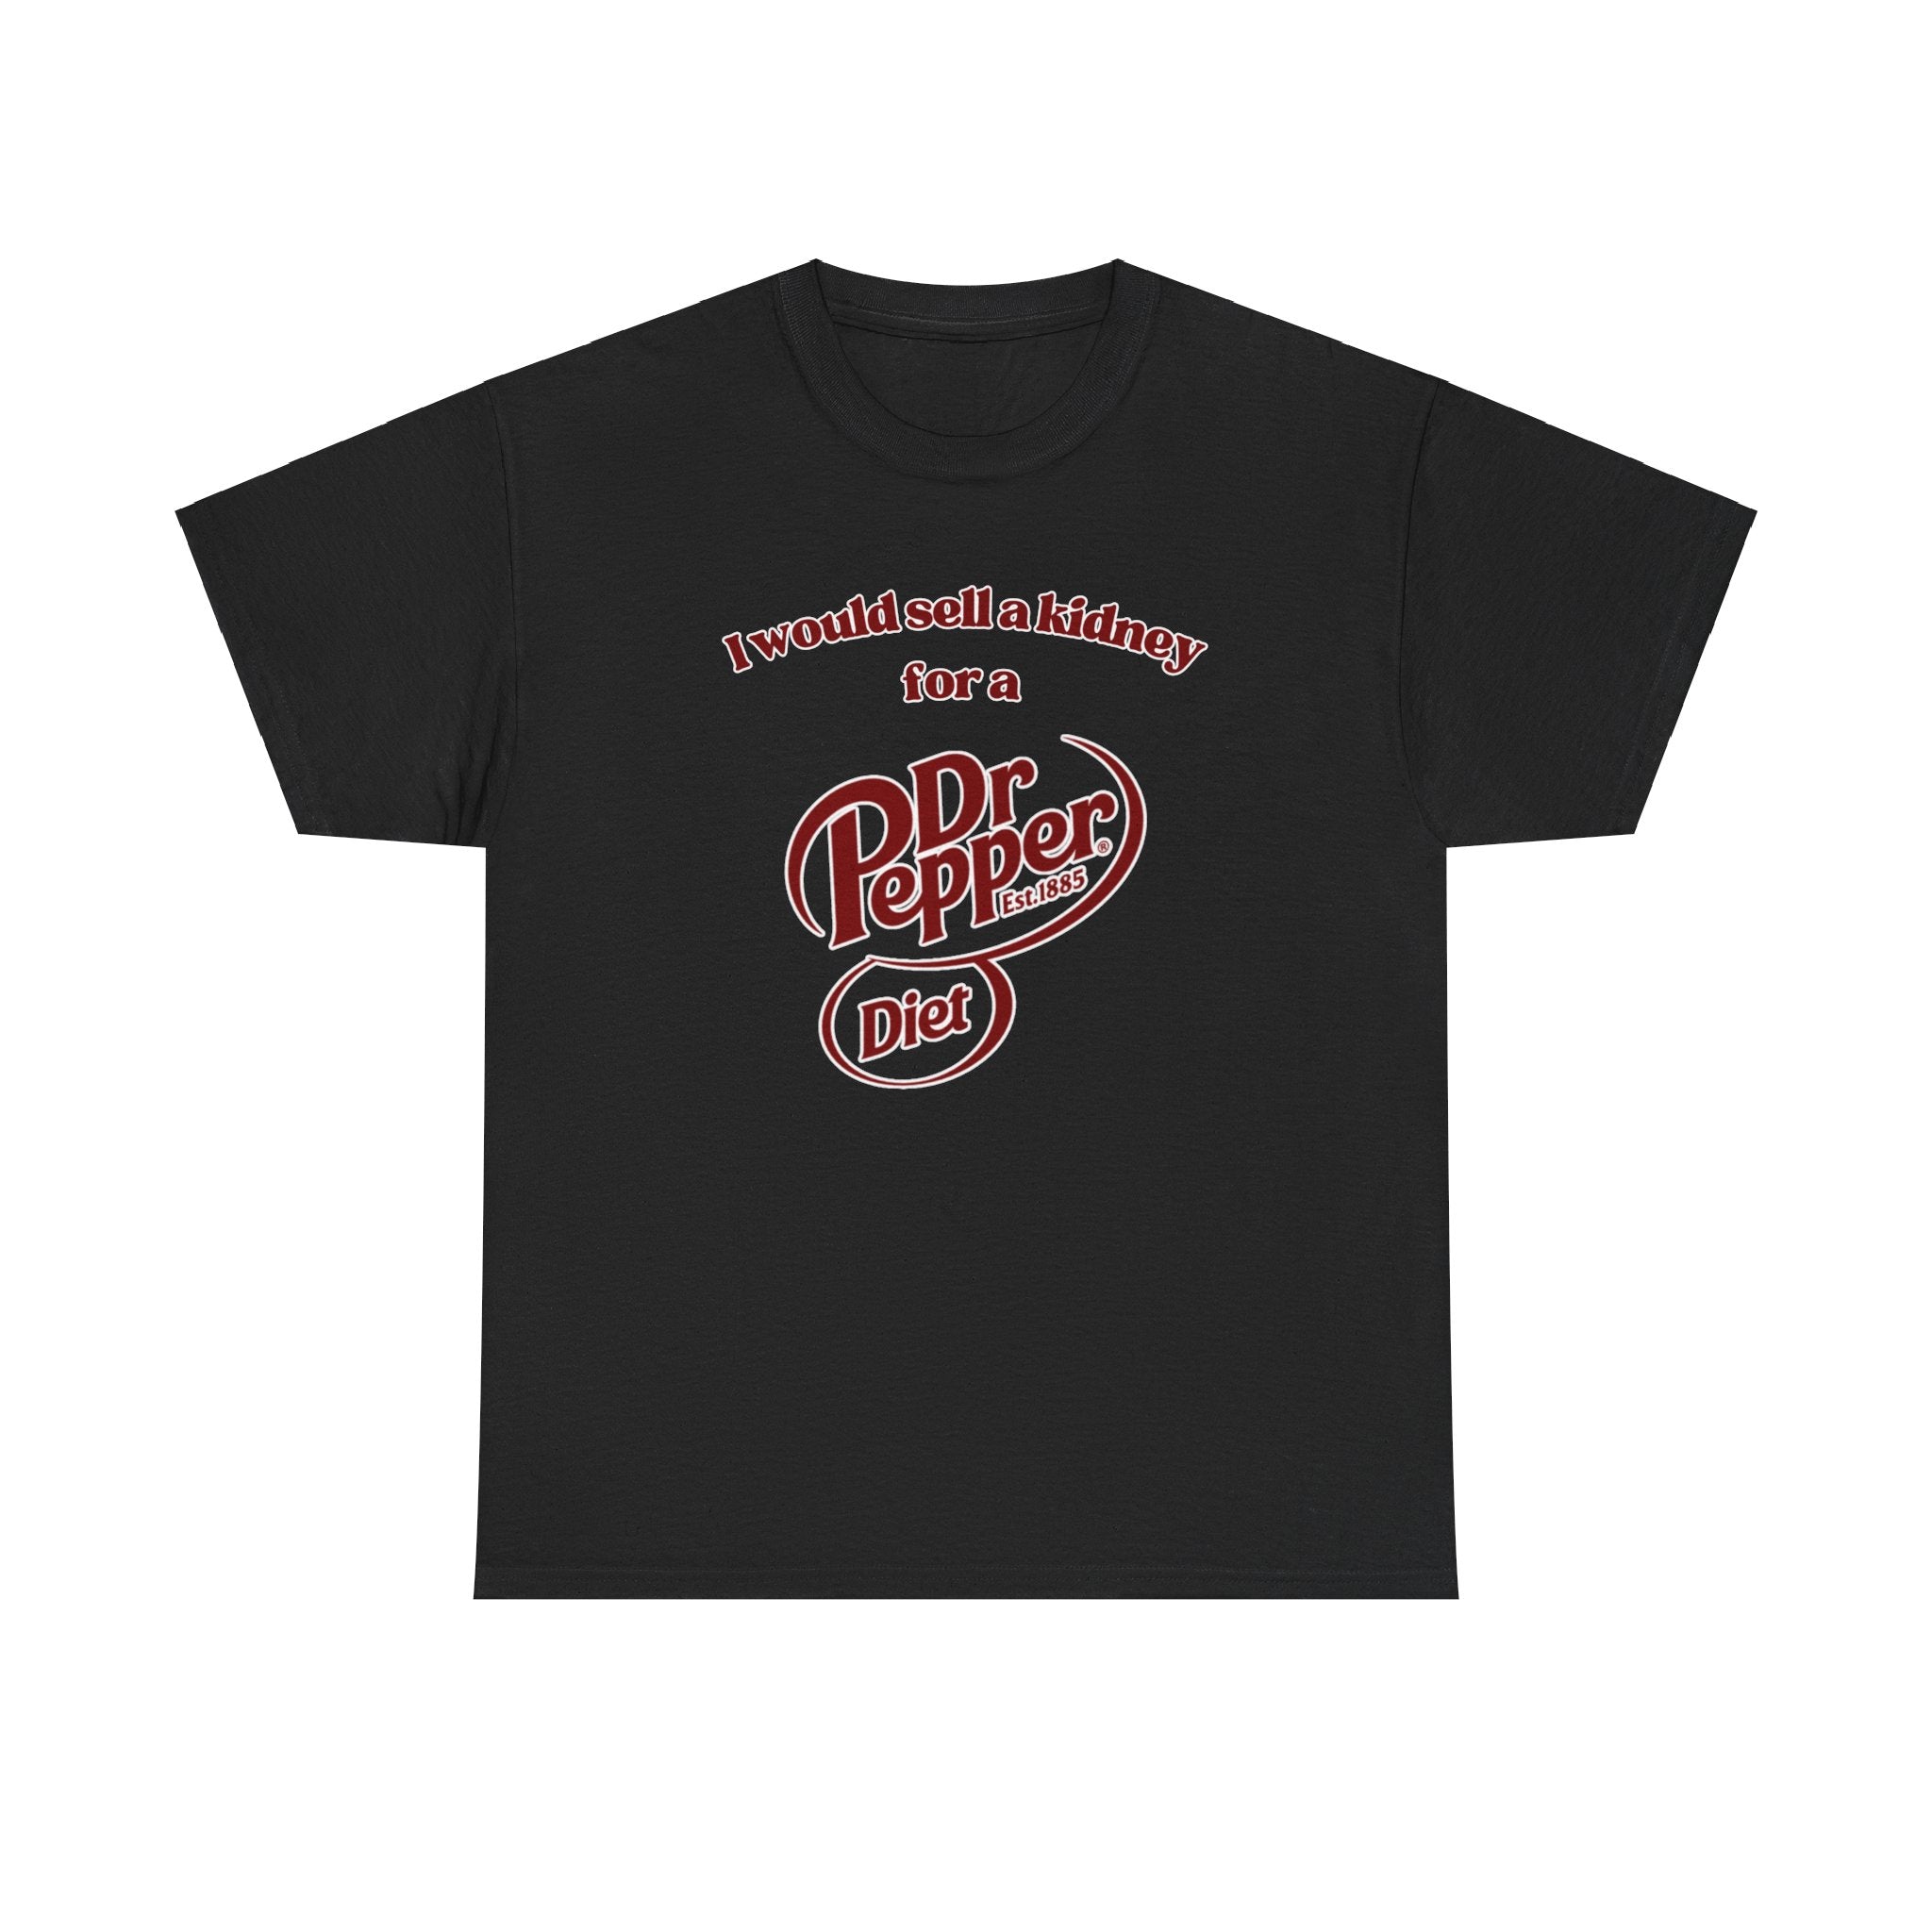 I Would Sell a Kidney for a Diet Dr. Pepper Shirt